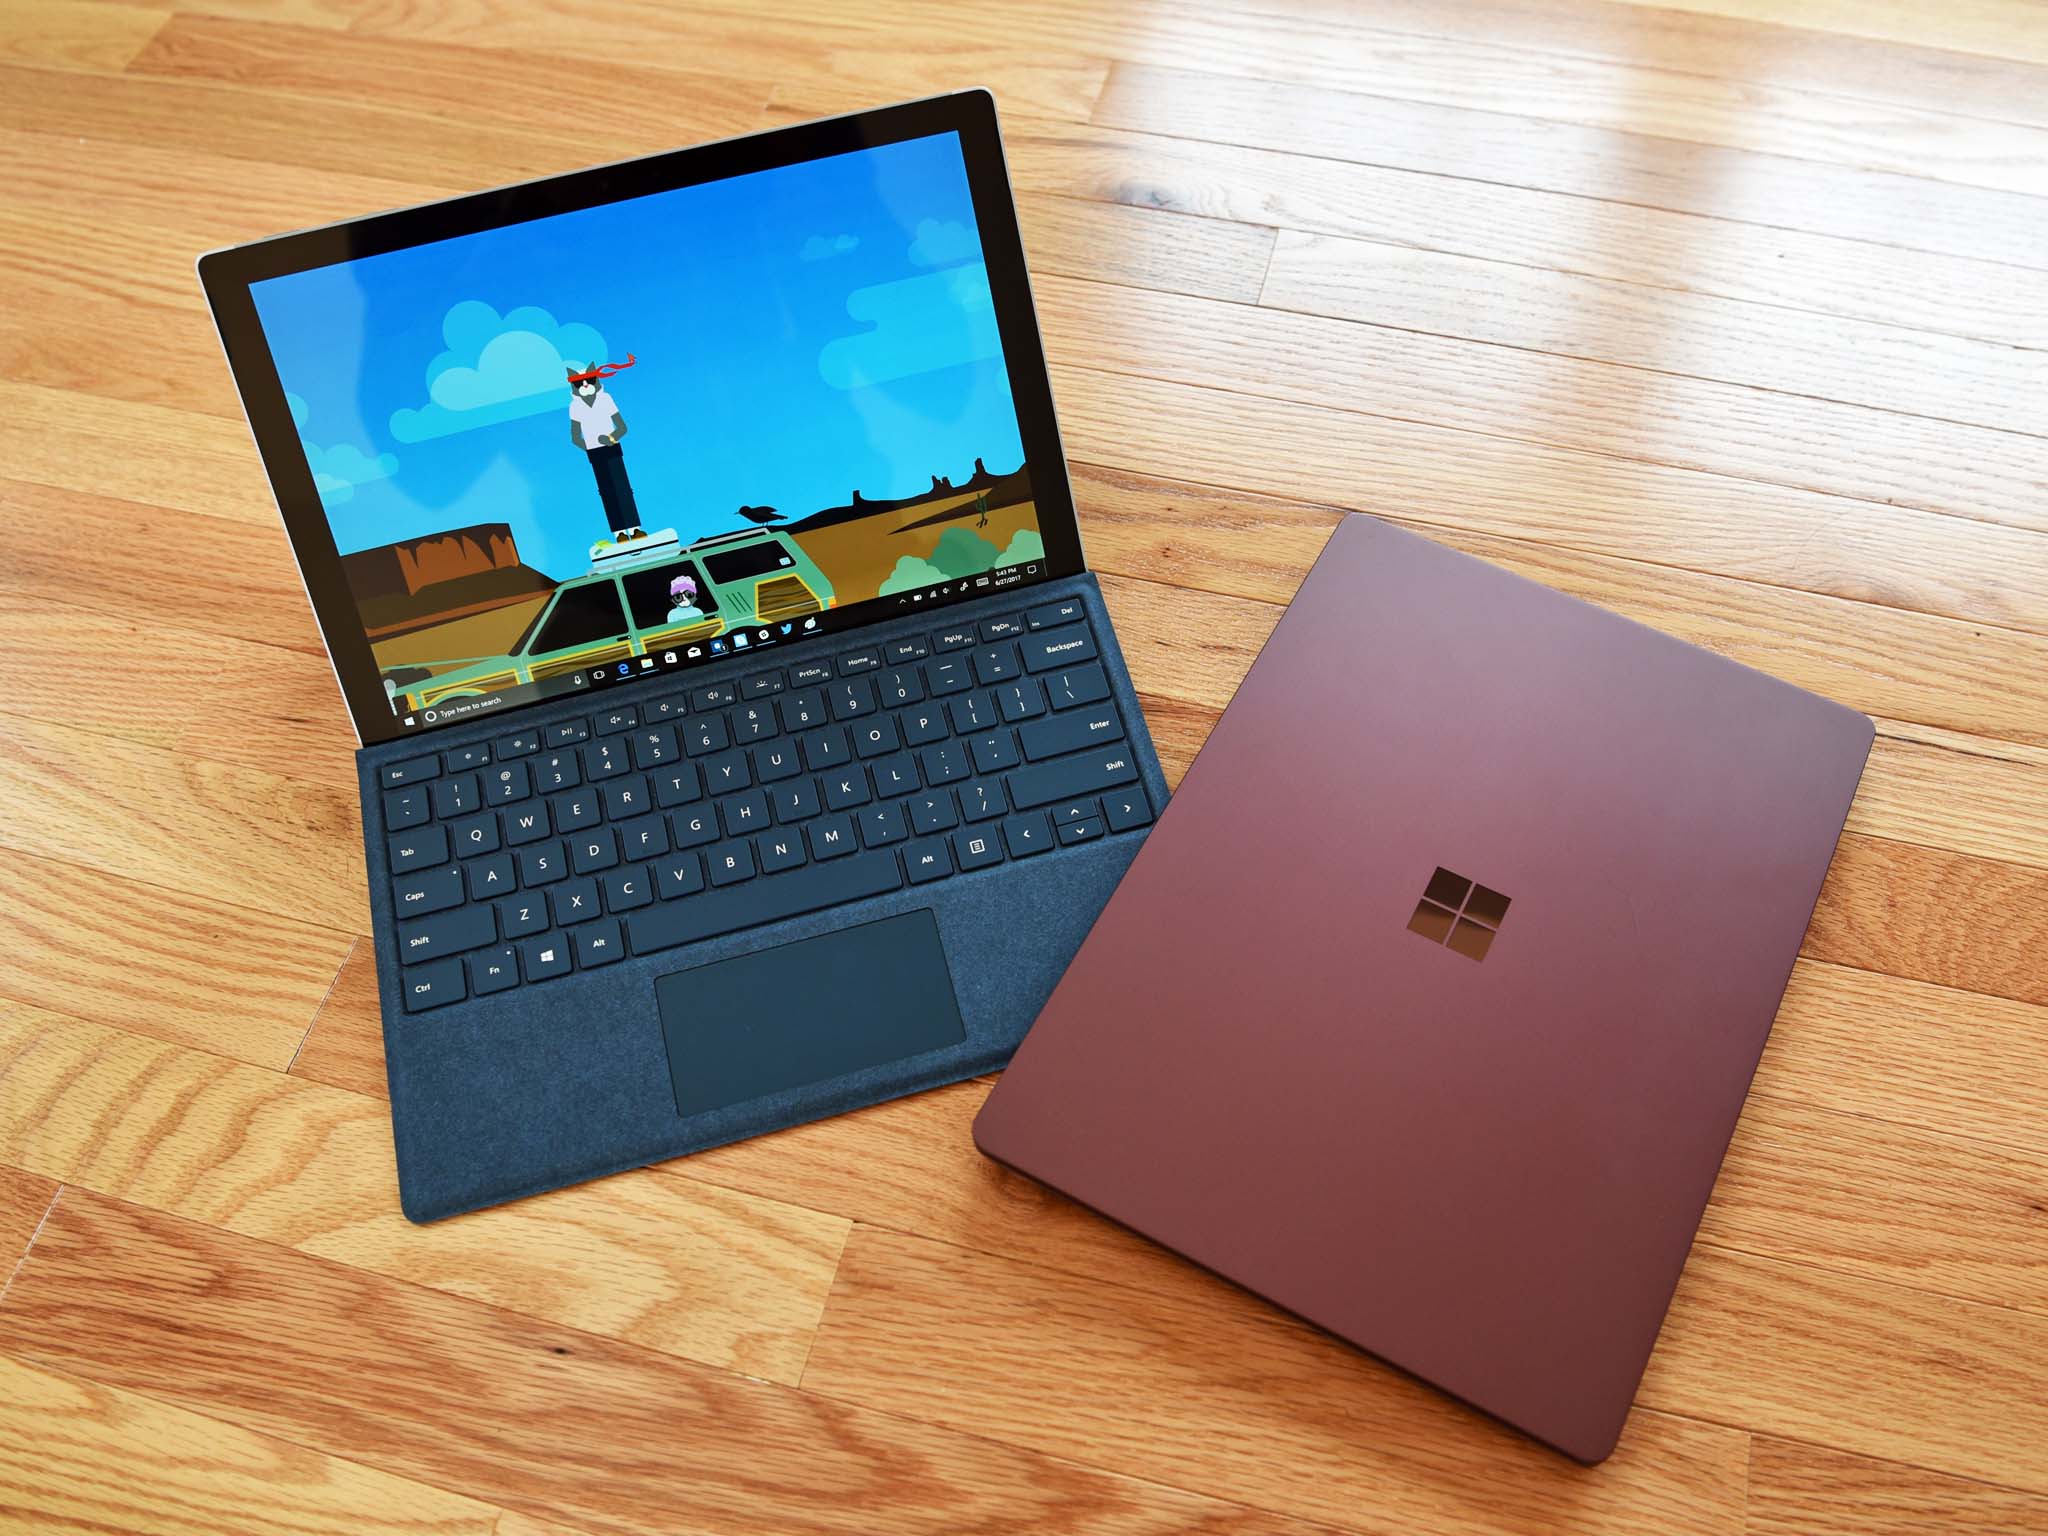 How To Install Roblox On Windows Rt 81 Get Free Robux In Codes - roblox not working on surface go